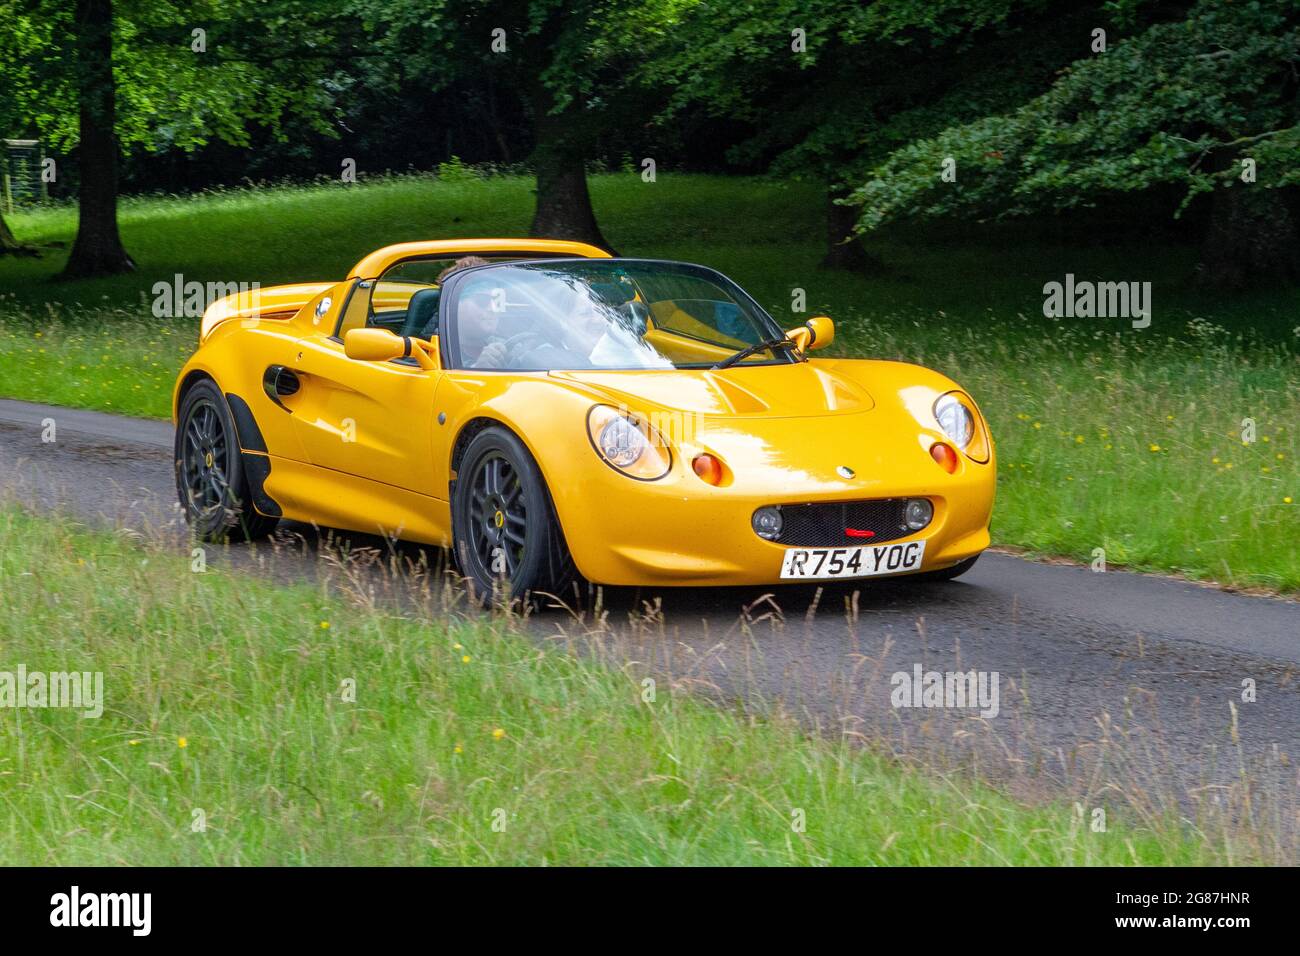 1998 90s yellow Lotus Elise 5 speed manual at ‘The Cars the Star Show” in Holker Hall & Gardens, Grange-over-Sands, UK Stock Photo